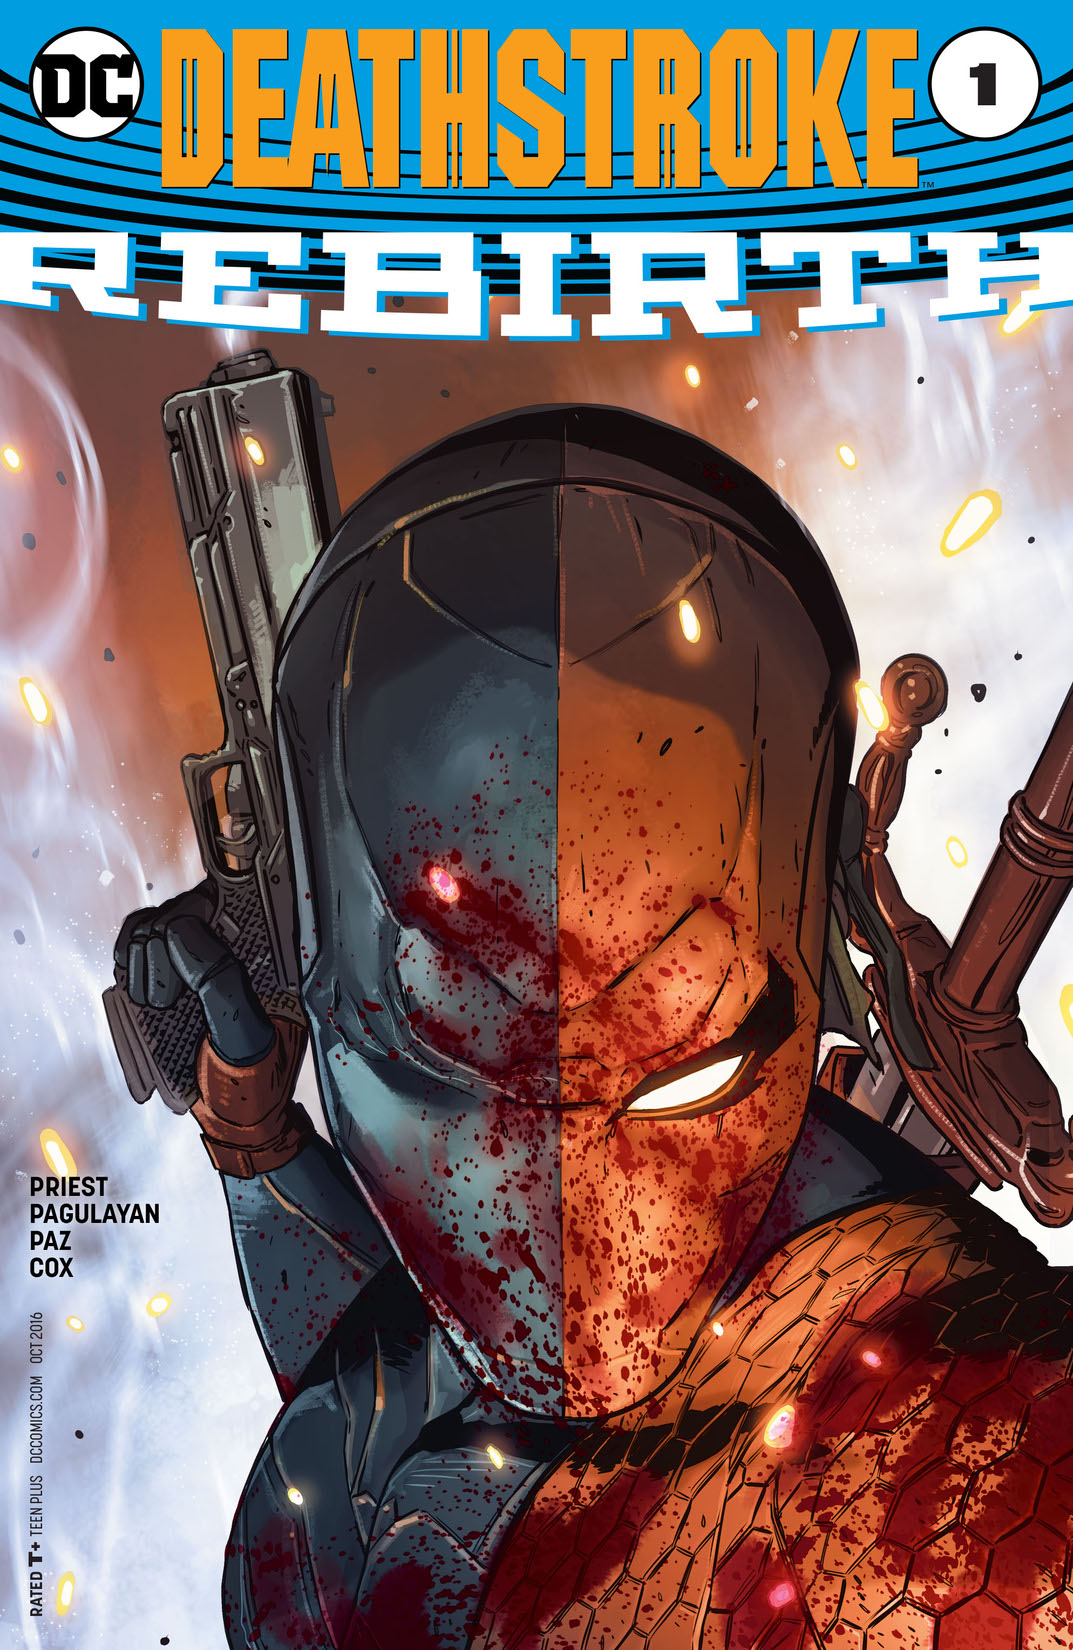 Deathstroke: Rebirth (2016-) #1 preview images